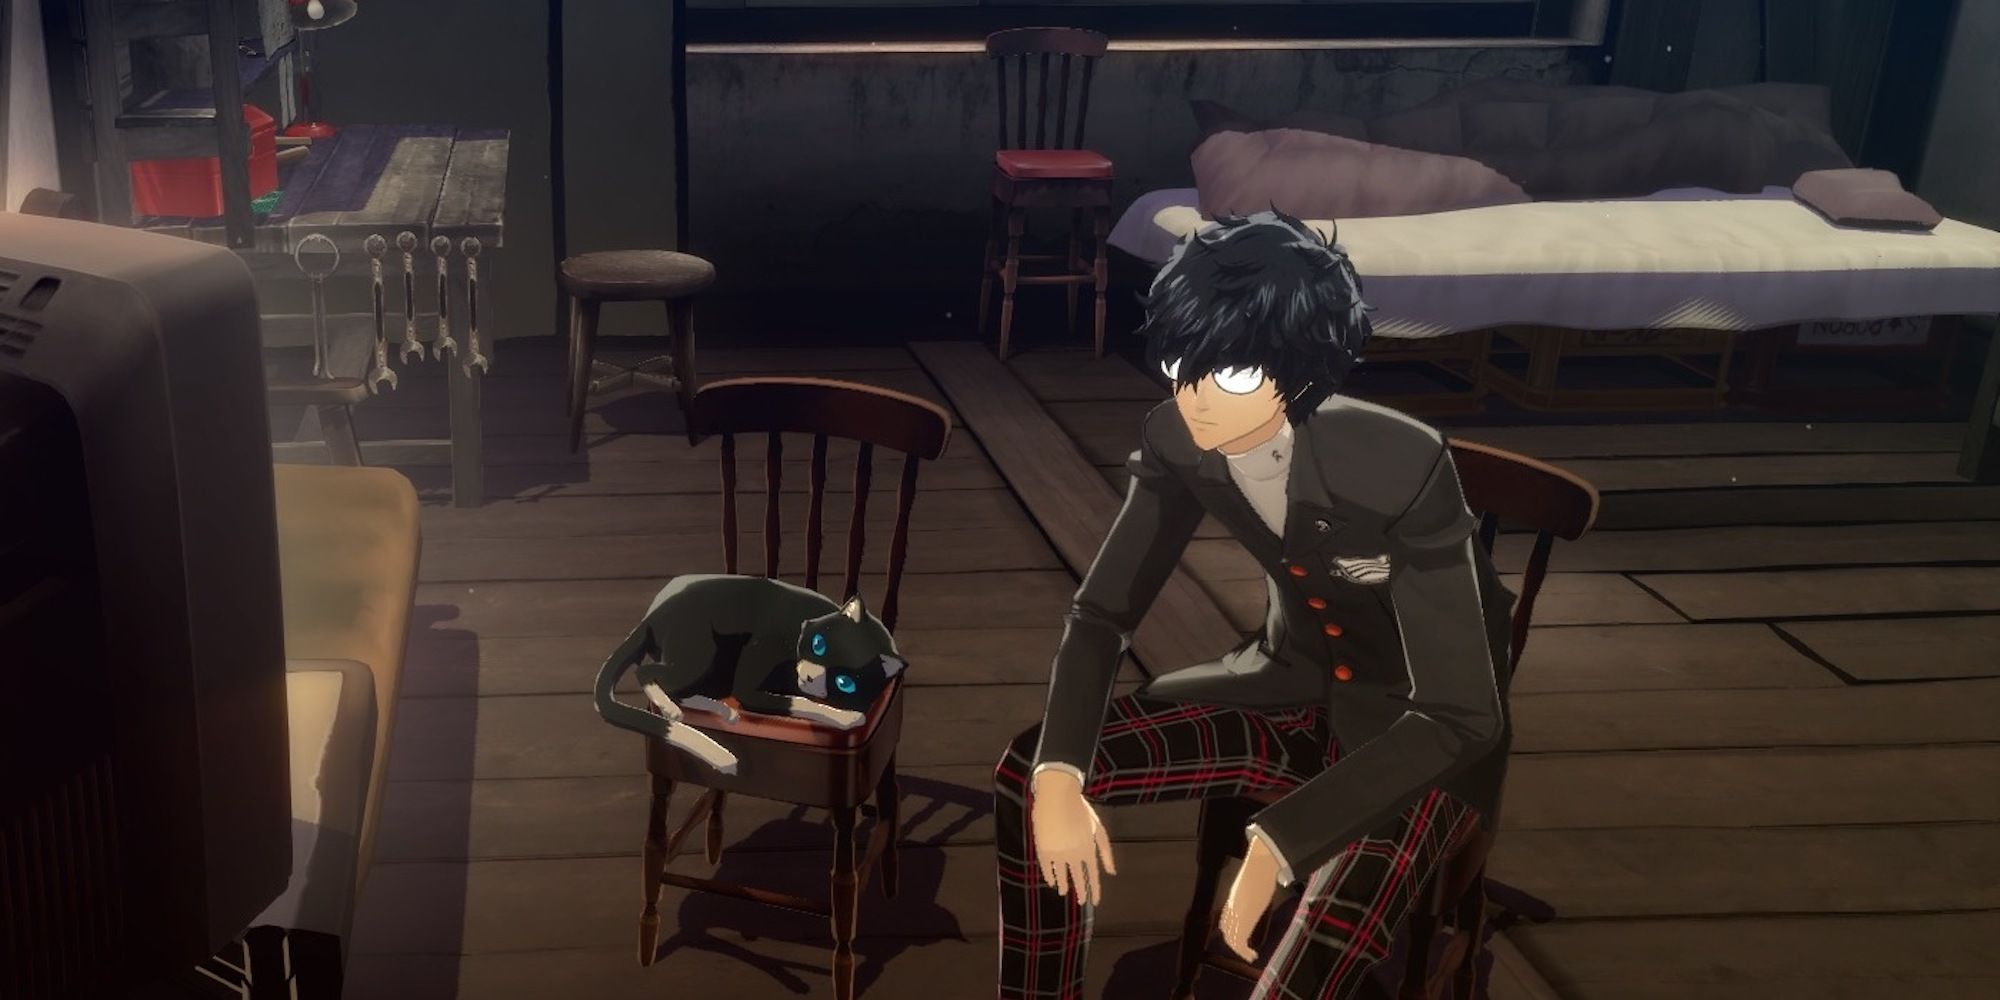 Morgana and the main character from Persona 5